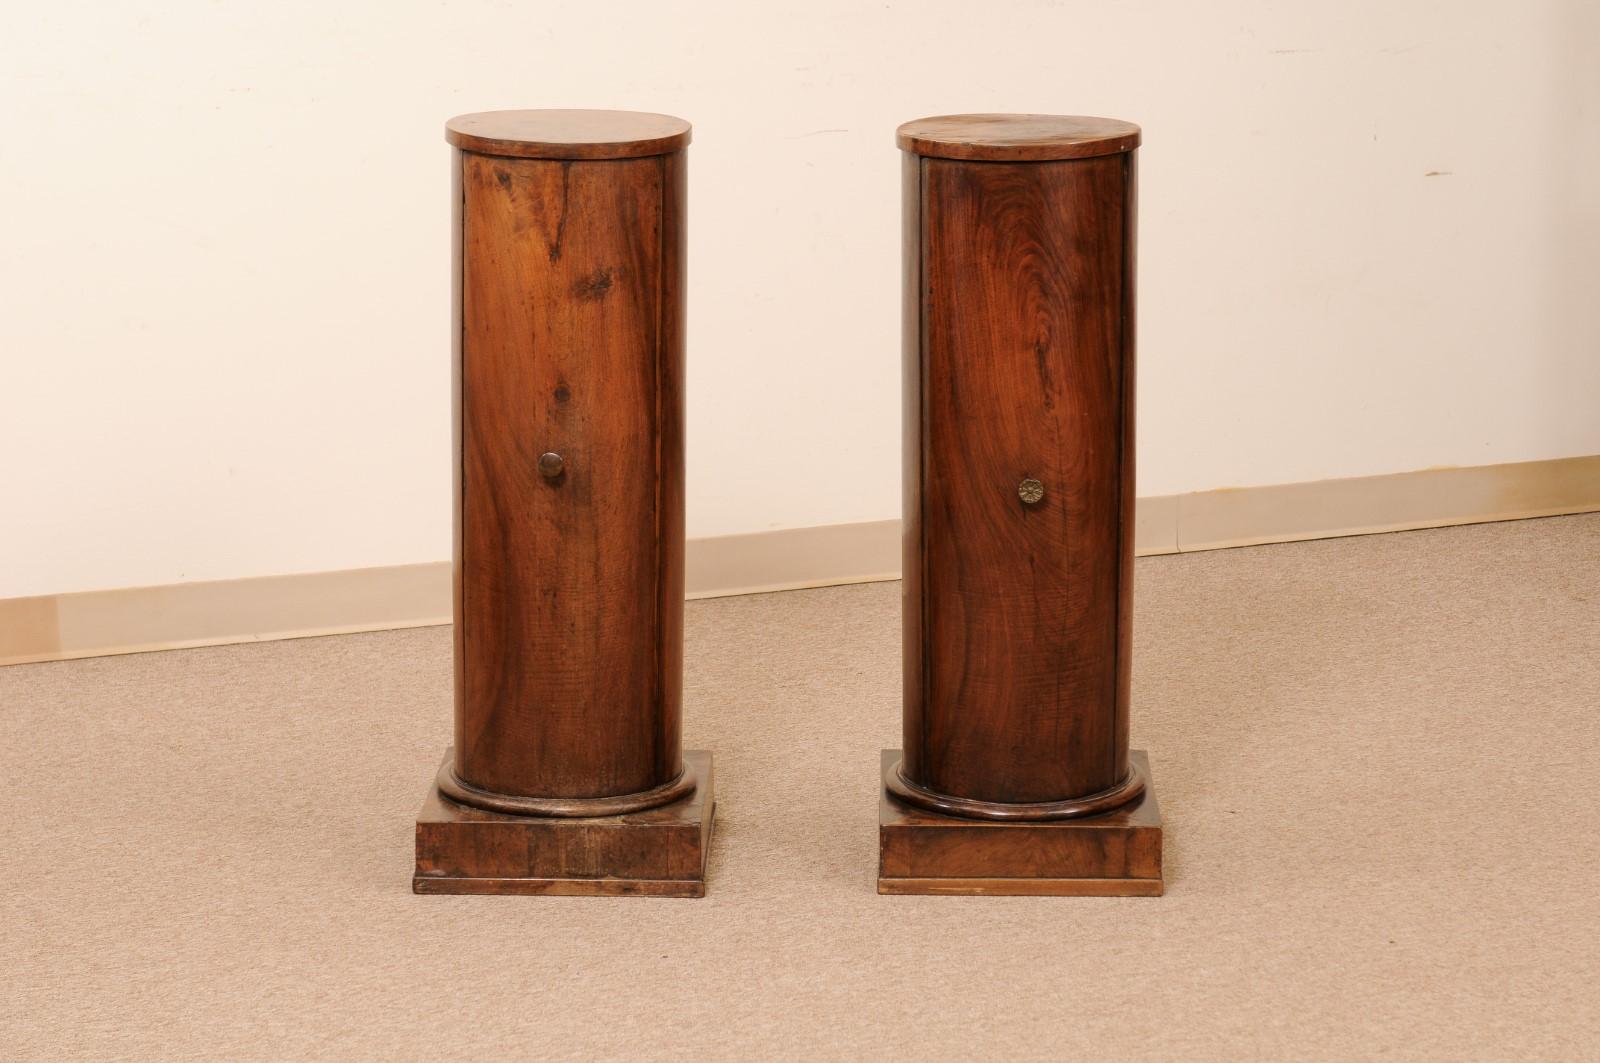 Pair of Early 19th Century Italian Neoclassical Walnut Pedestal Cabinets For Sale 9